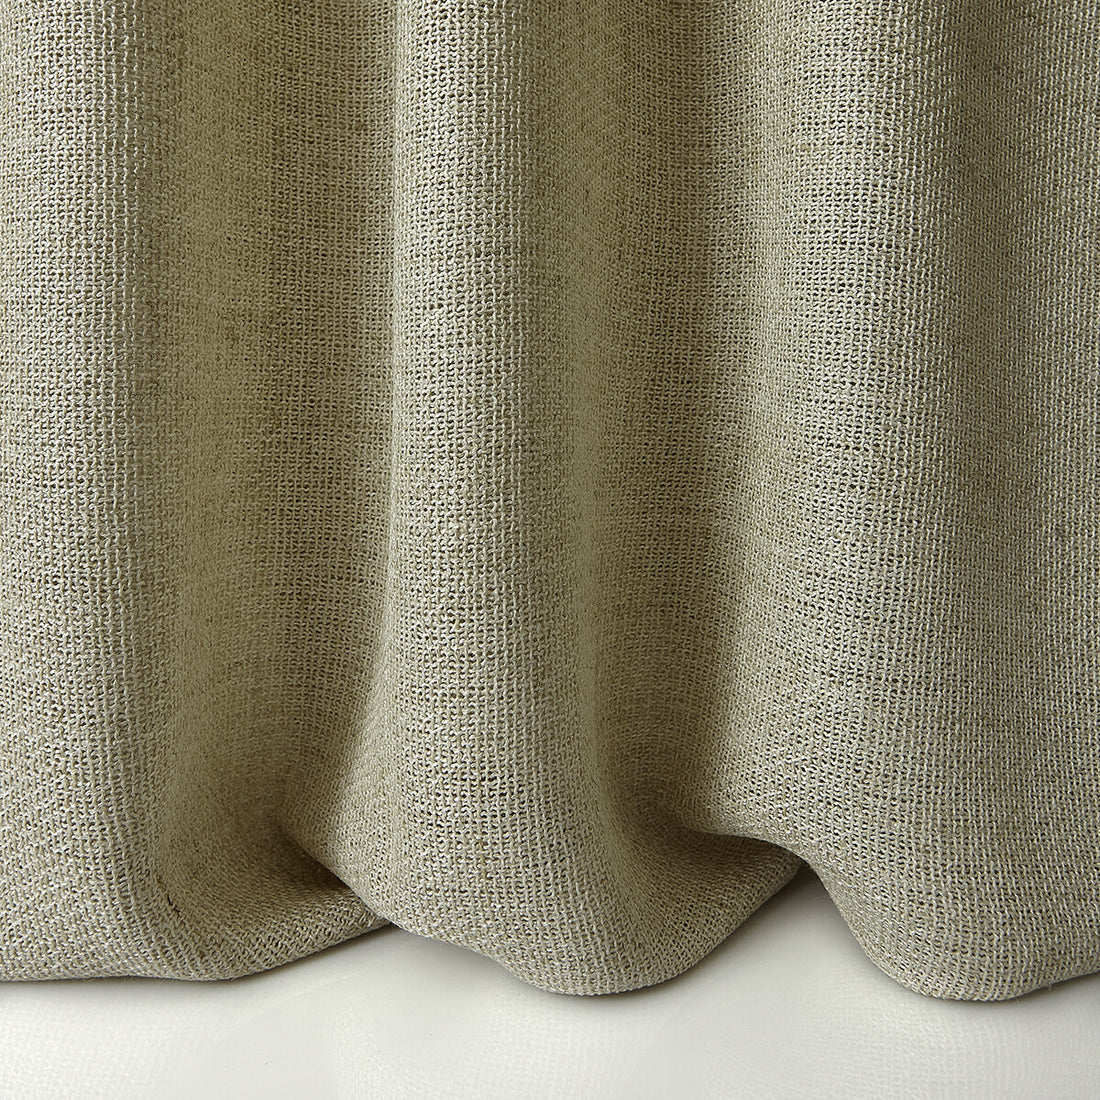 Brava fabric in 6 color - pattern LZ-30194.06.0 - by Kravet Design in the Lizzo collection